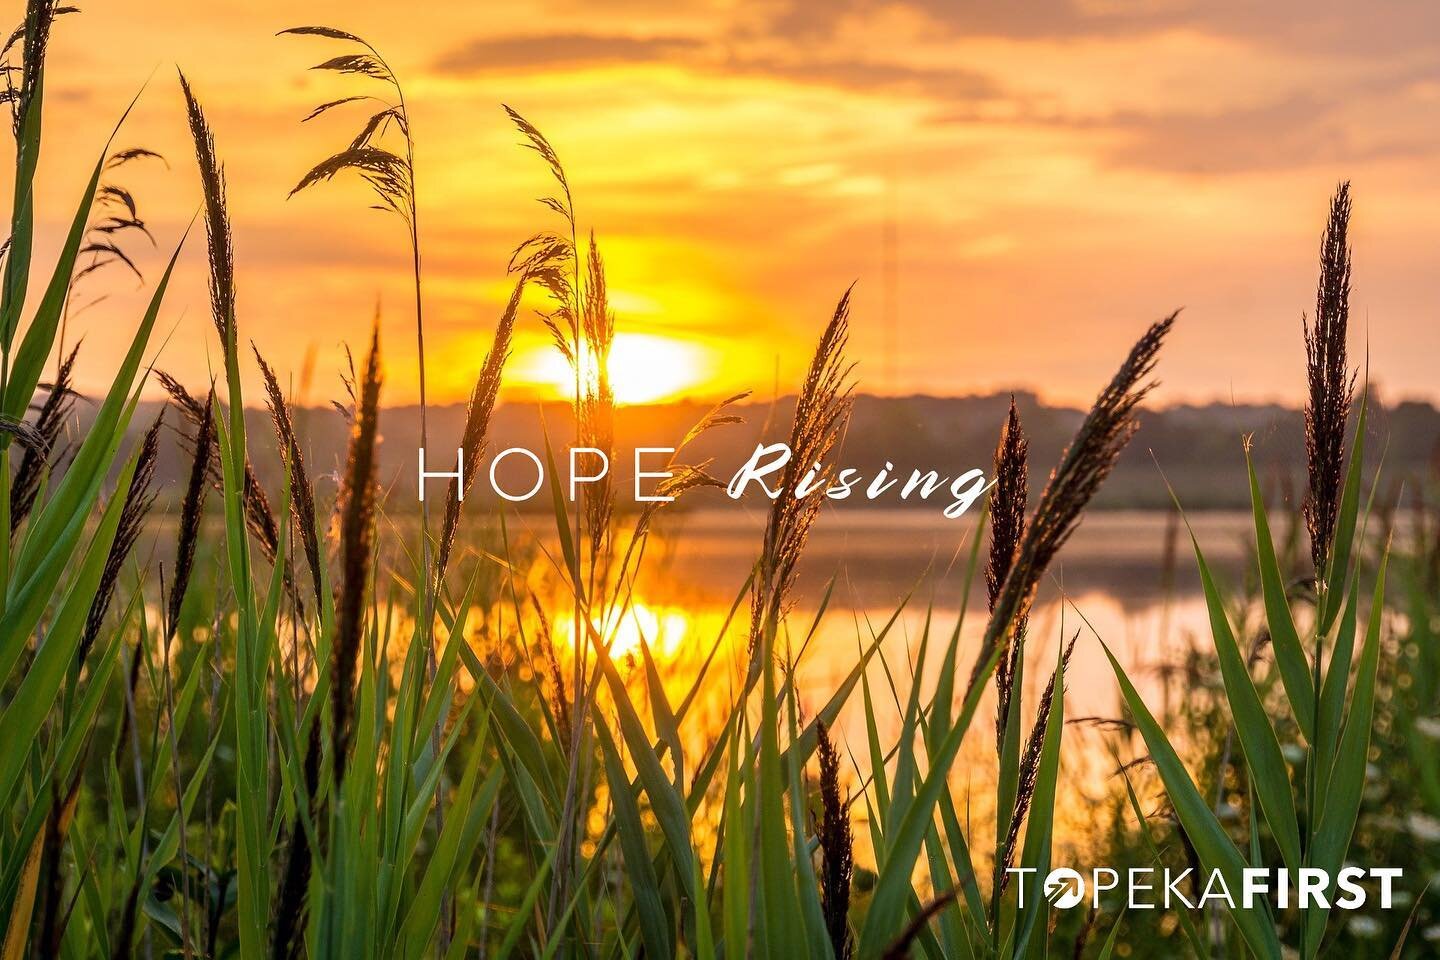 Hope is rising! Our King has risen from death to life and offers each of us new life in Him. Happy Easter!